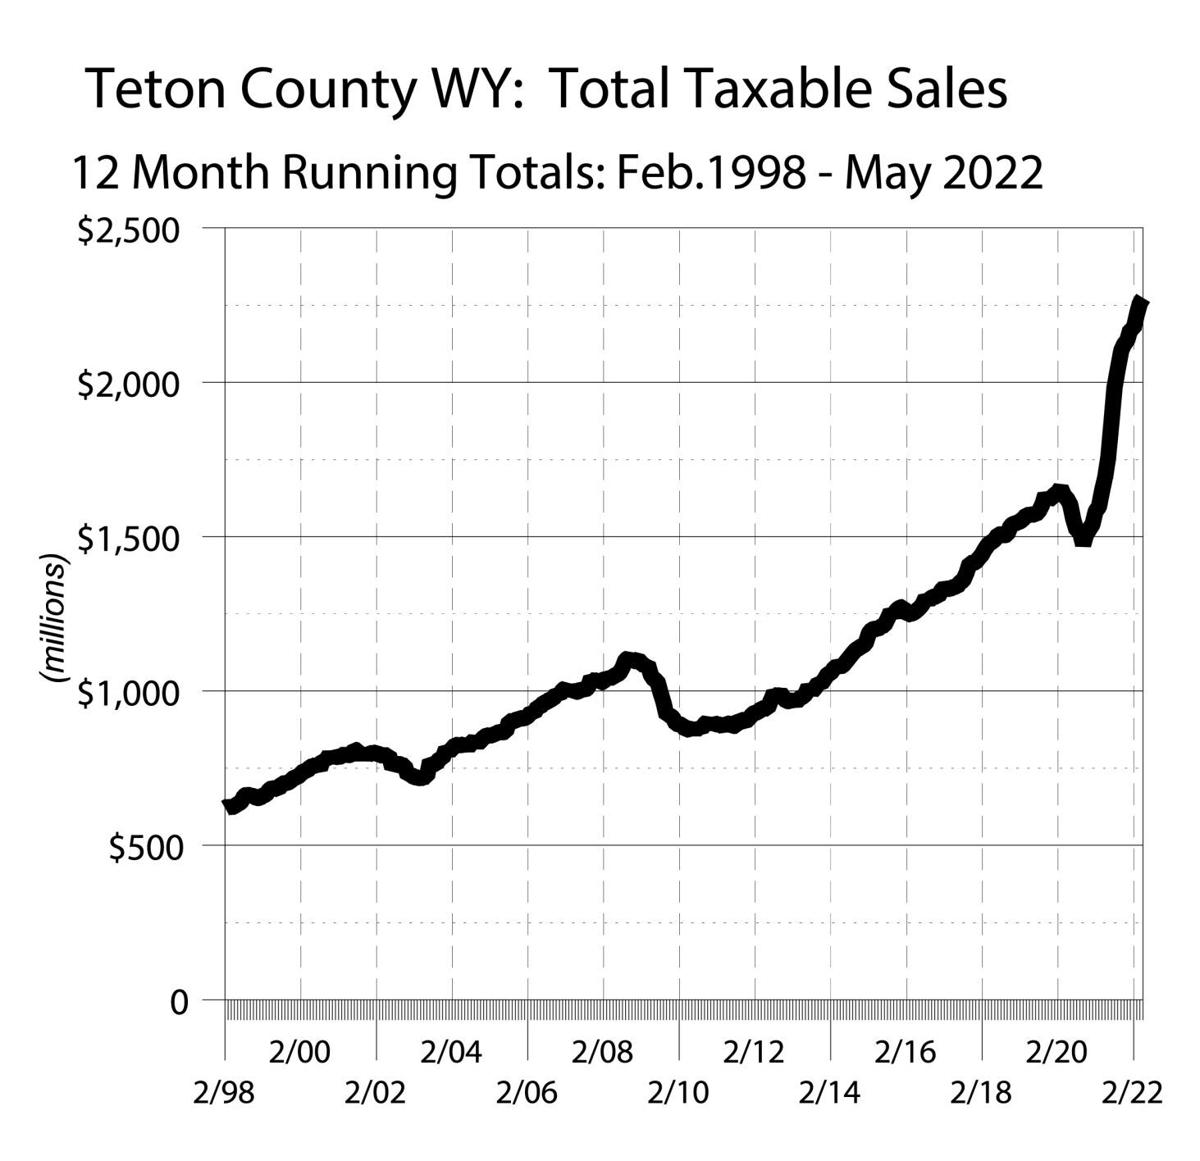 Teton County, WY - Total Taxable Sales